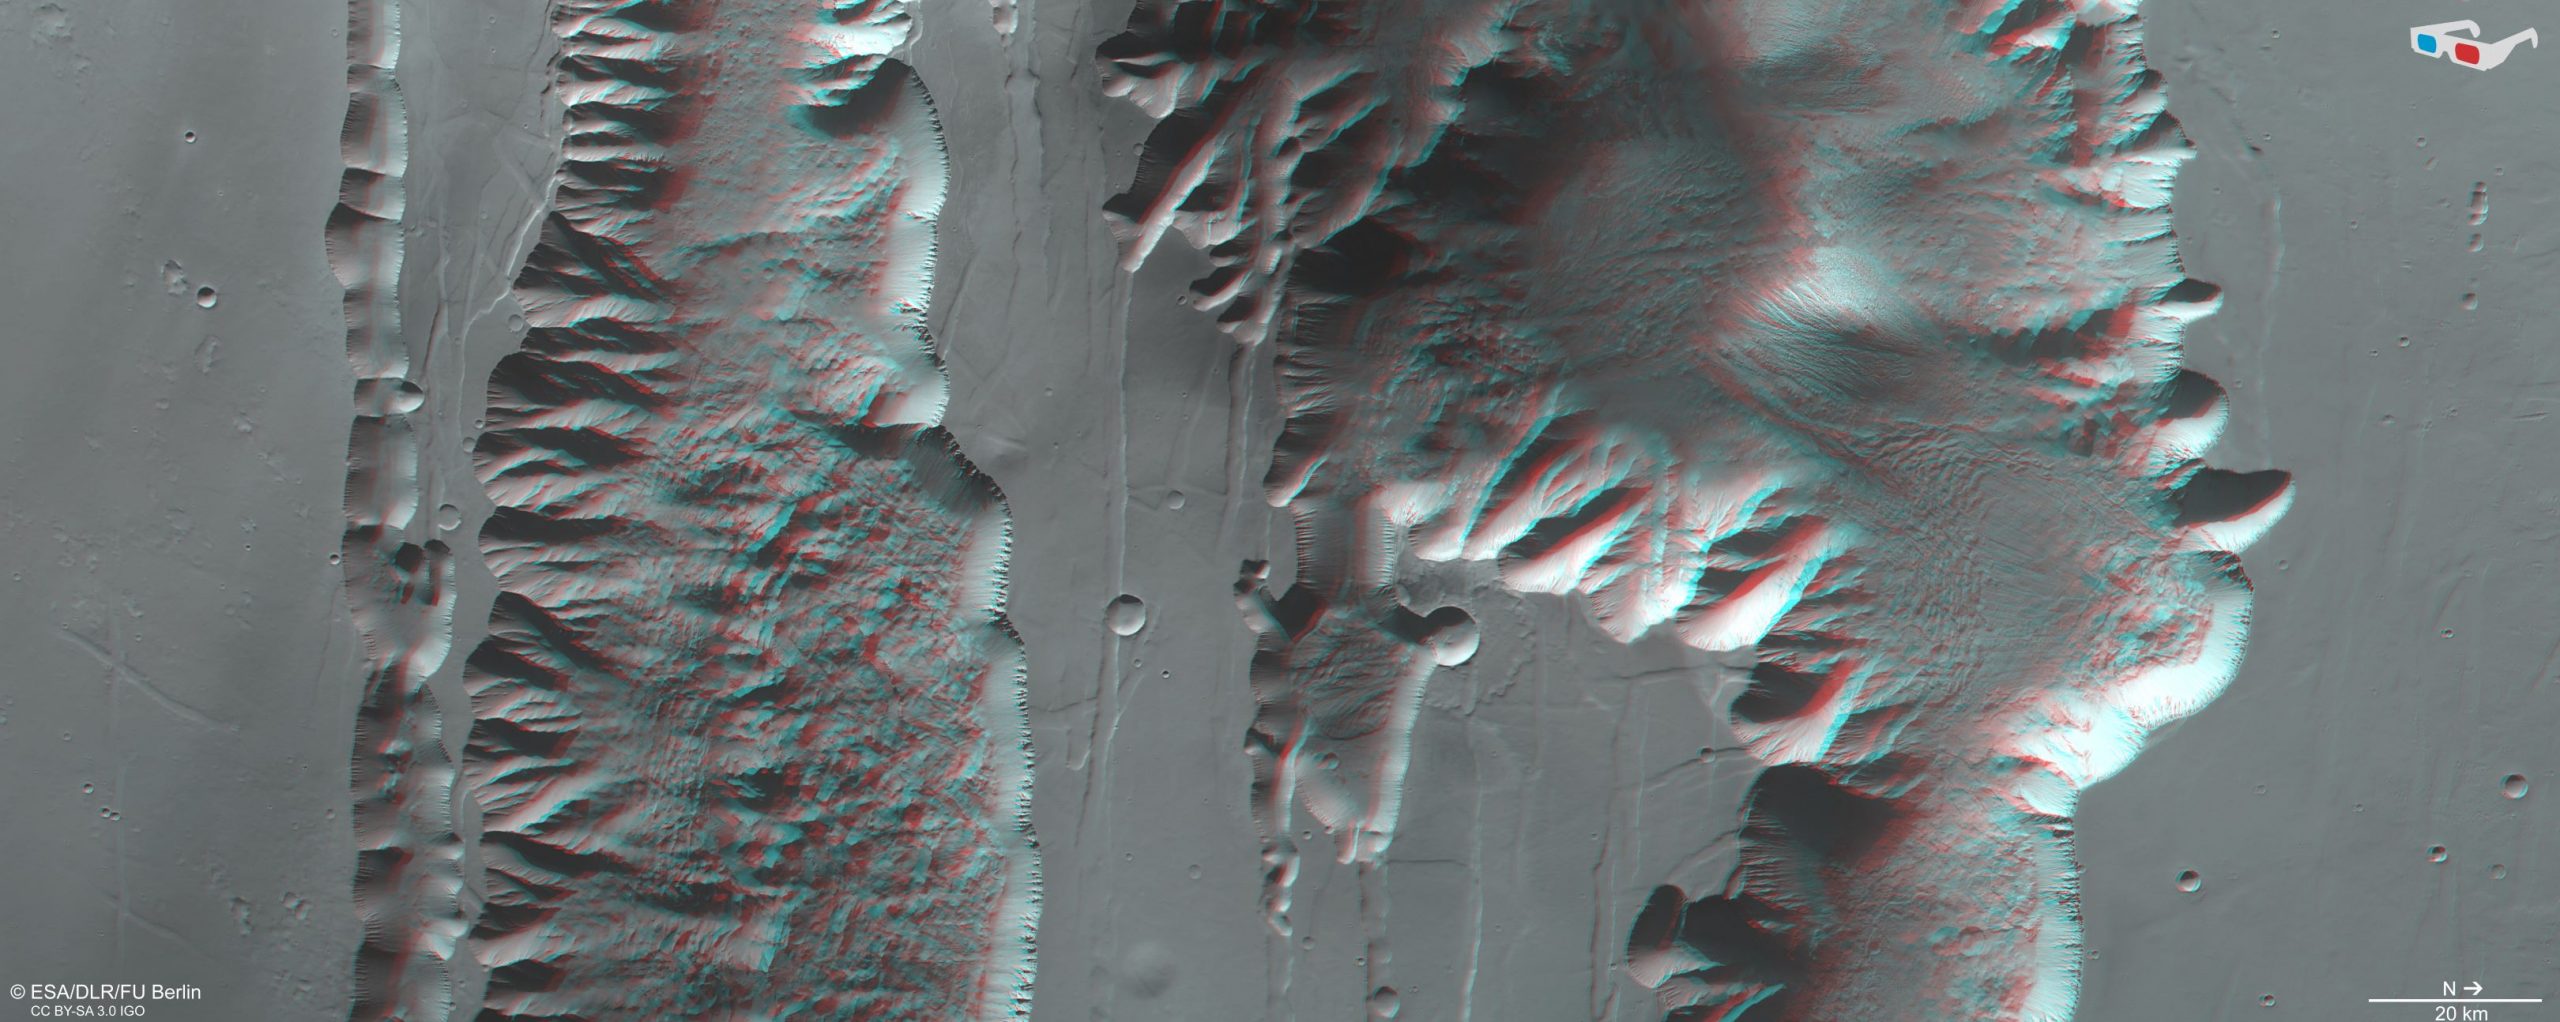 In this image, you can see the Ius and Tithonium Chasmata in 3D, which are part of the Valles Marineris canyon structure on Mars. The image was created using the High-Resolution Stereo Camera (HRSC) aboard ESA's Mars Express on April 21, 2022. ESA/DLR/FU Berlin, CC BY-SA 3.0 IGO.